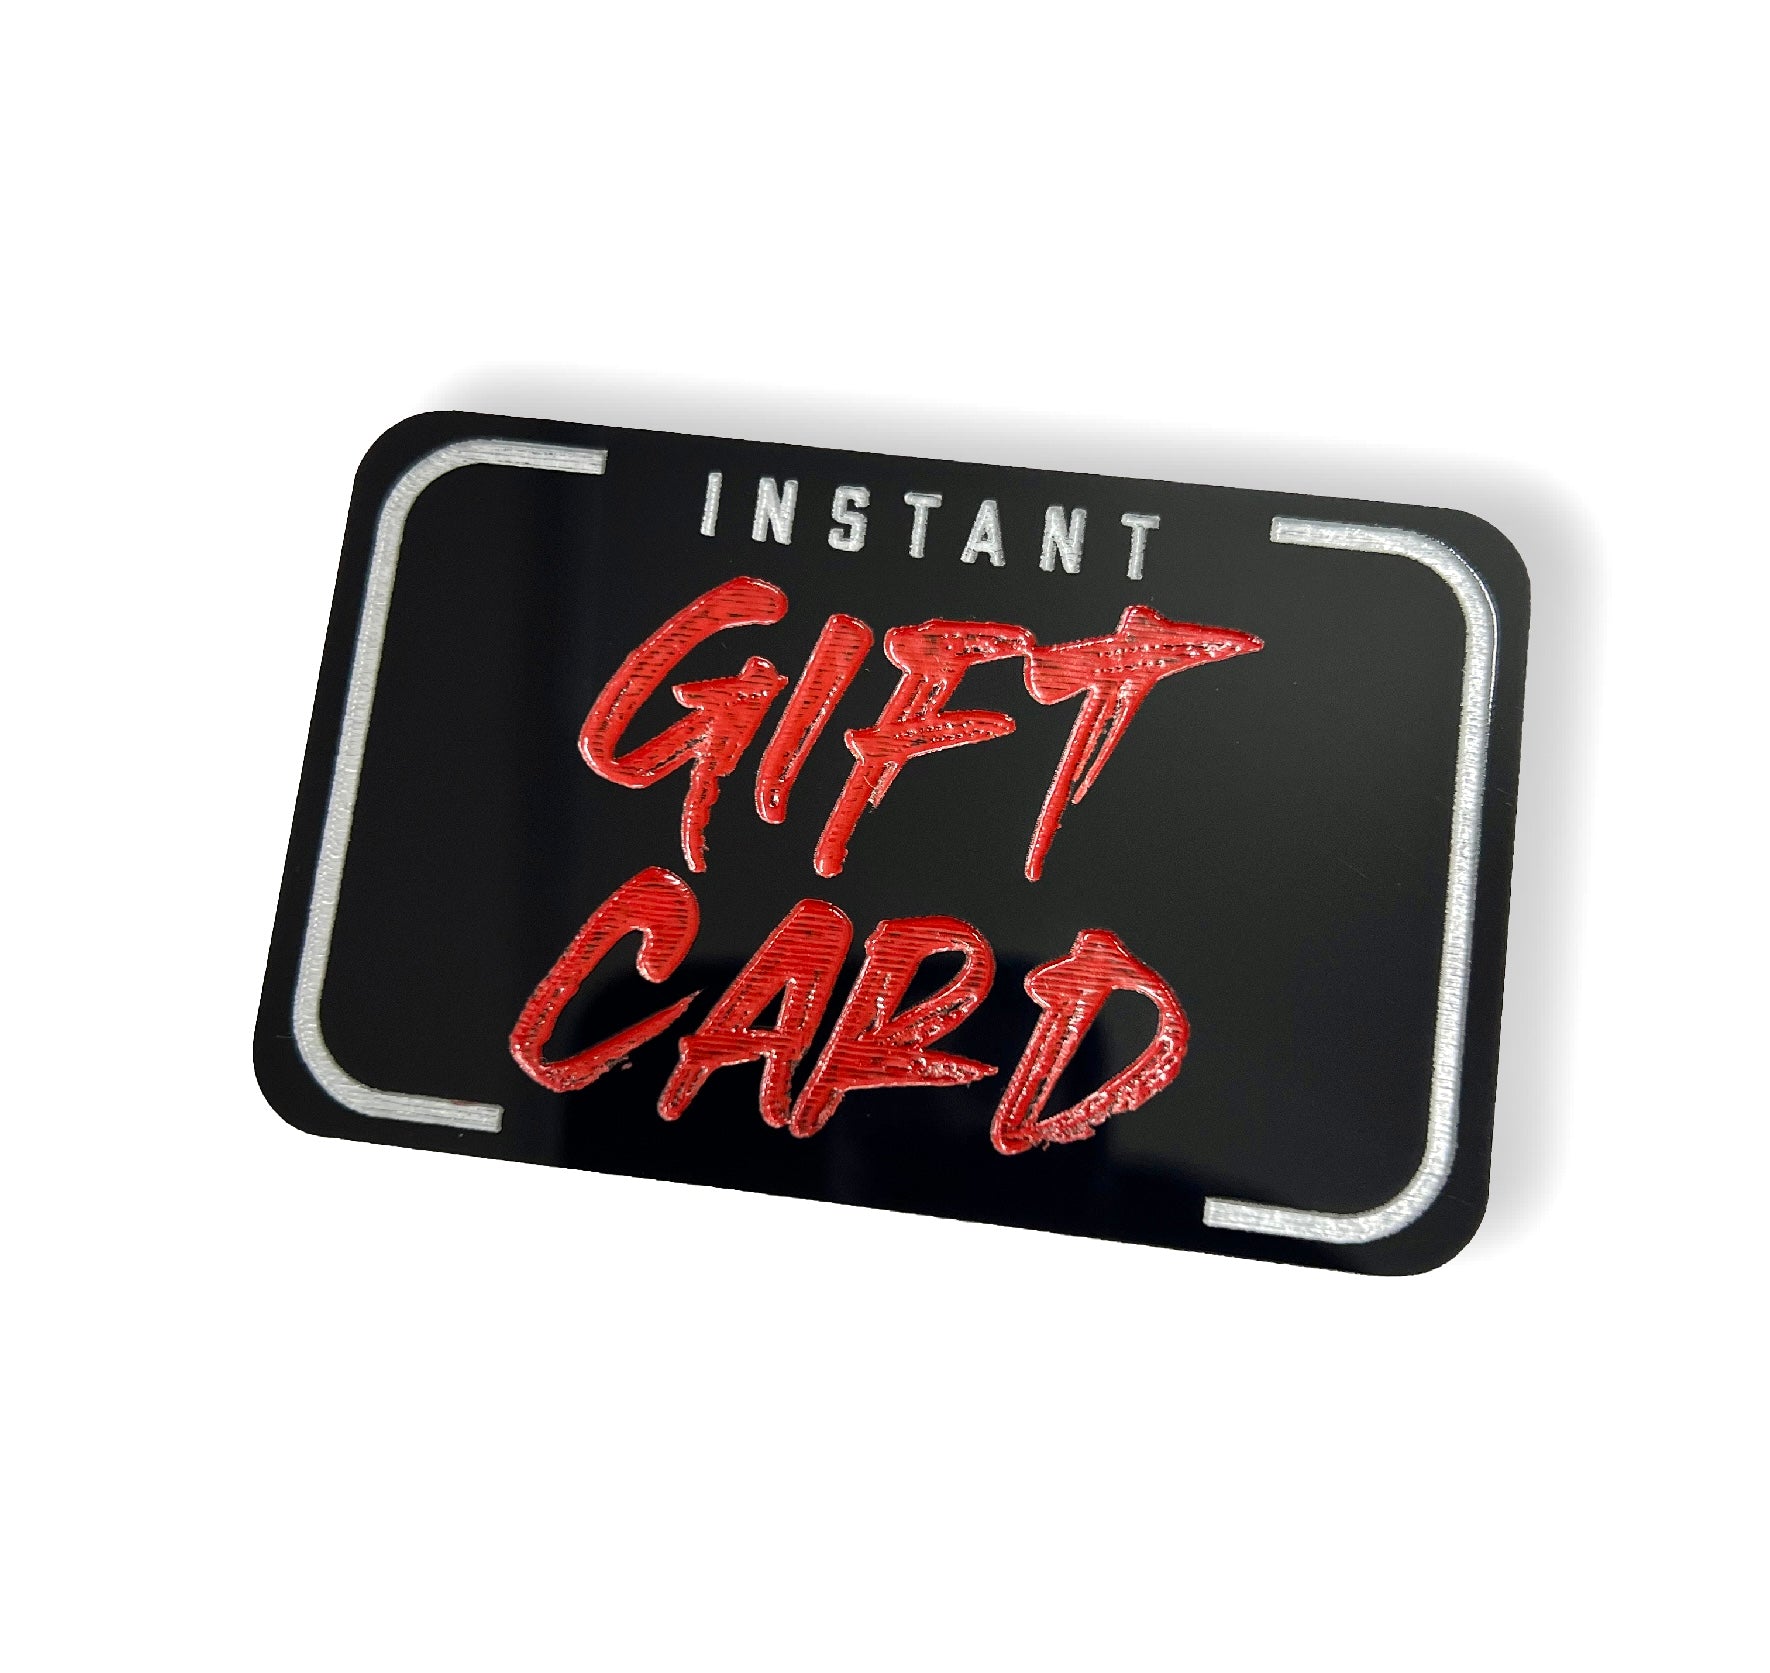 Instant Gaming Gift Card